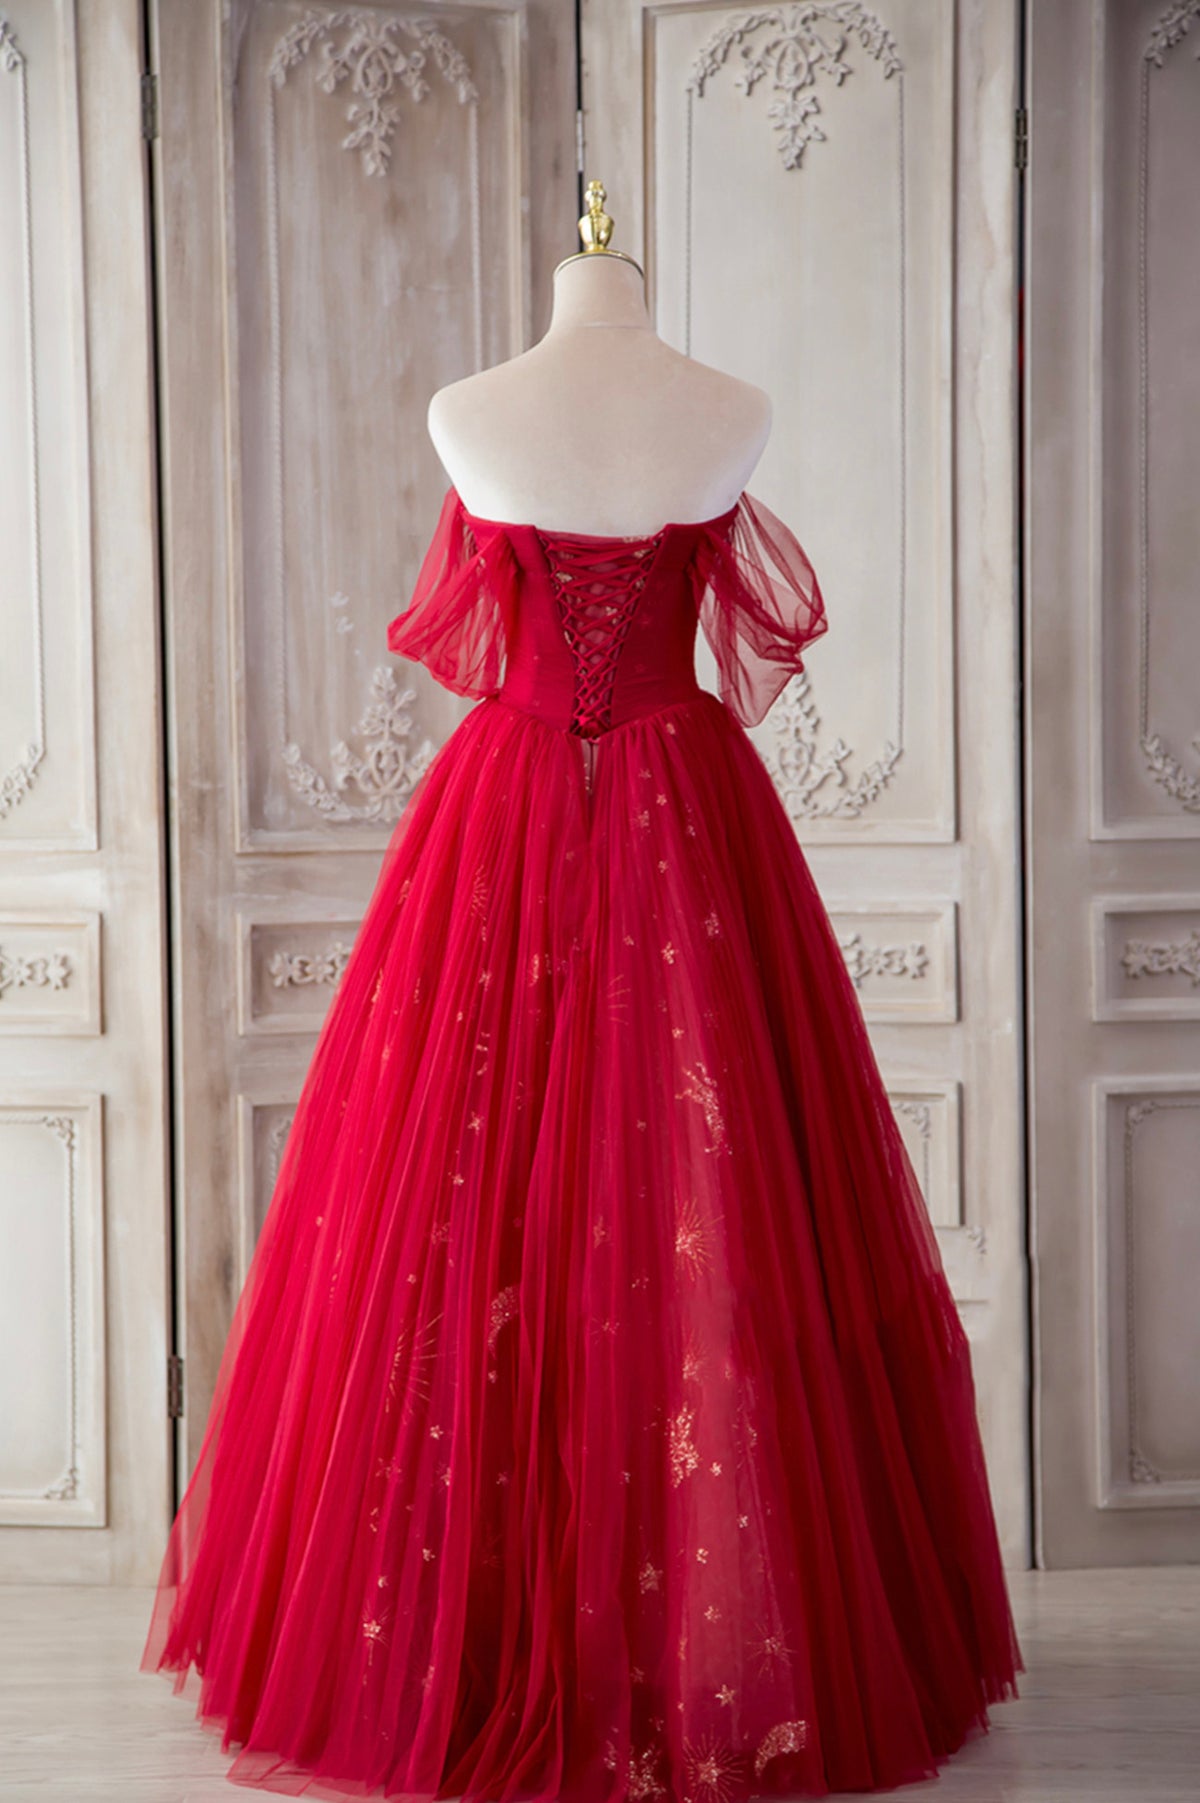 The Red Strapless Tulle Long A-Line Prom Dress is a showstopper. With its off-the-shoulder design and A-line silhouette, it perfectly blends elegance and allure.